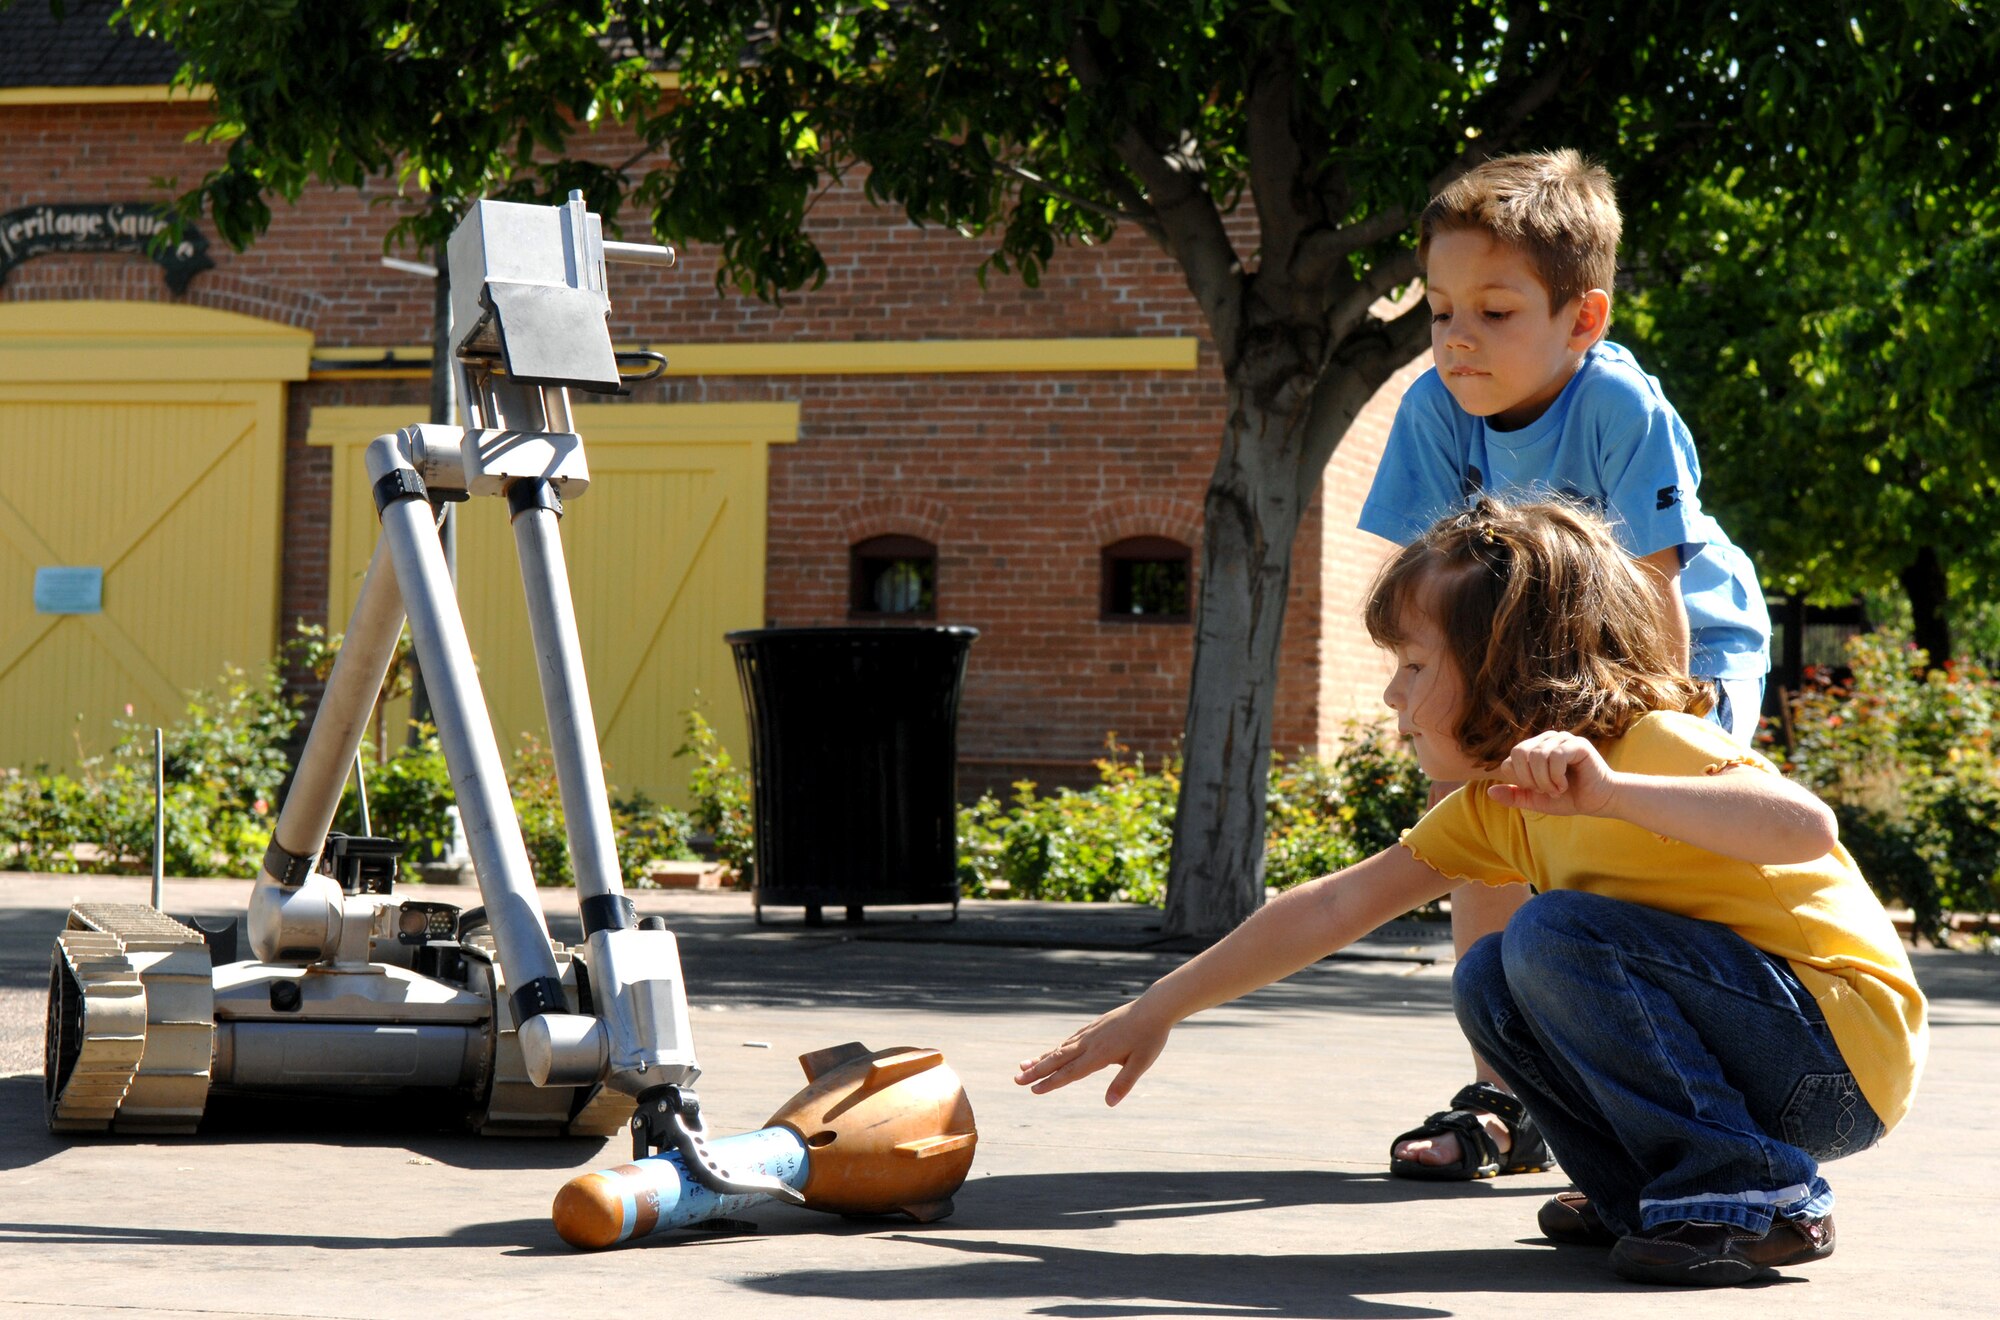 Antonia Ortiz, age 6, and Teresa Ortiz, age 4, watch as an explosive ordnance disposal robot reaches down to retrieve a simulated bomb March 20. The display was part of Air Force Week at the Arizona Science Center in downtown Phoenix. (U.S. Air Force photo/Staff Sgt. Brian Ferguson)